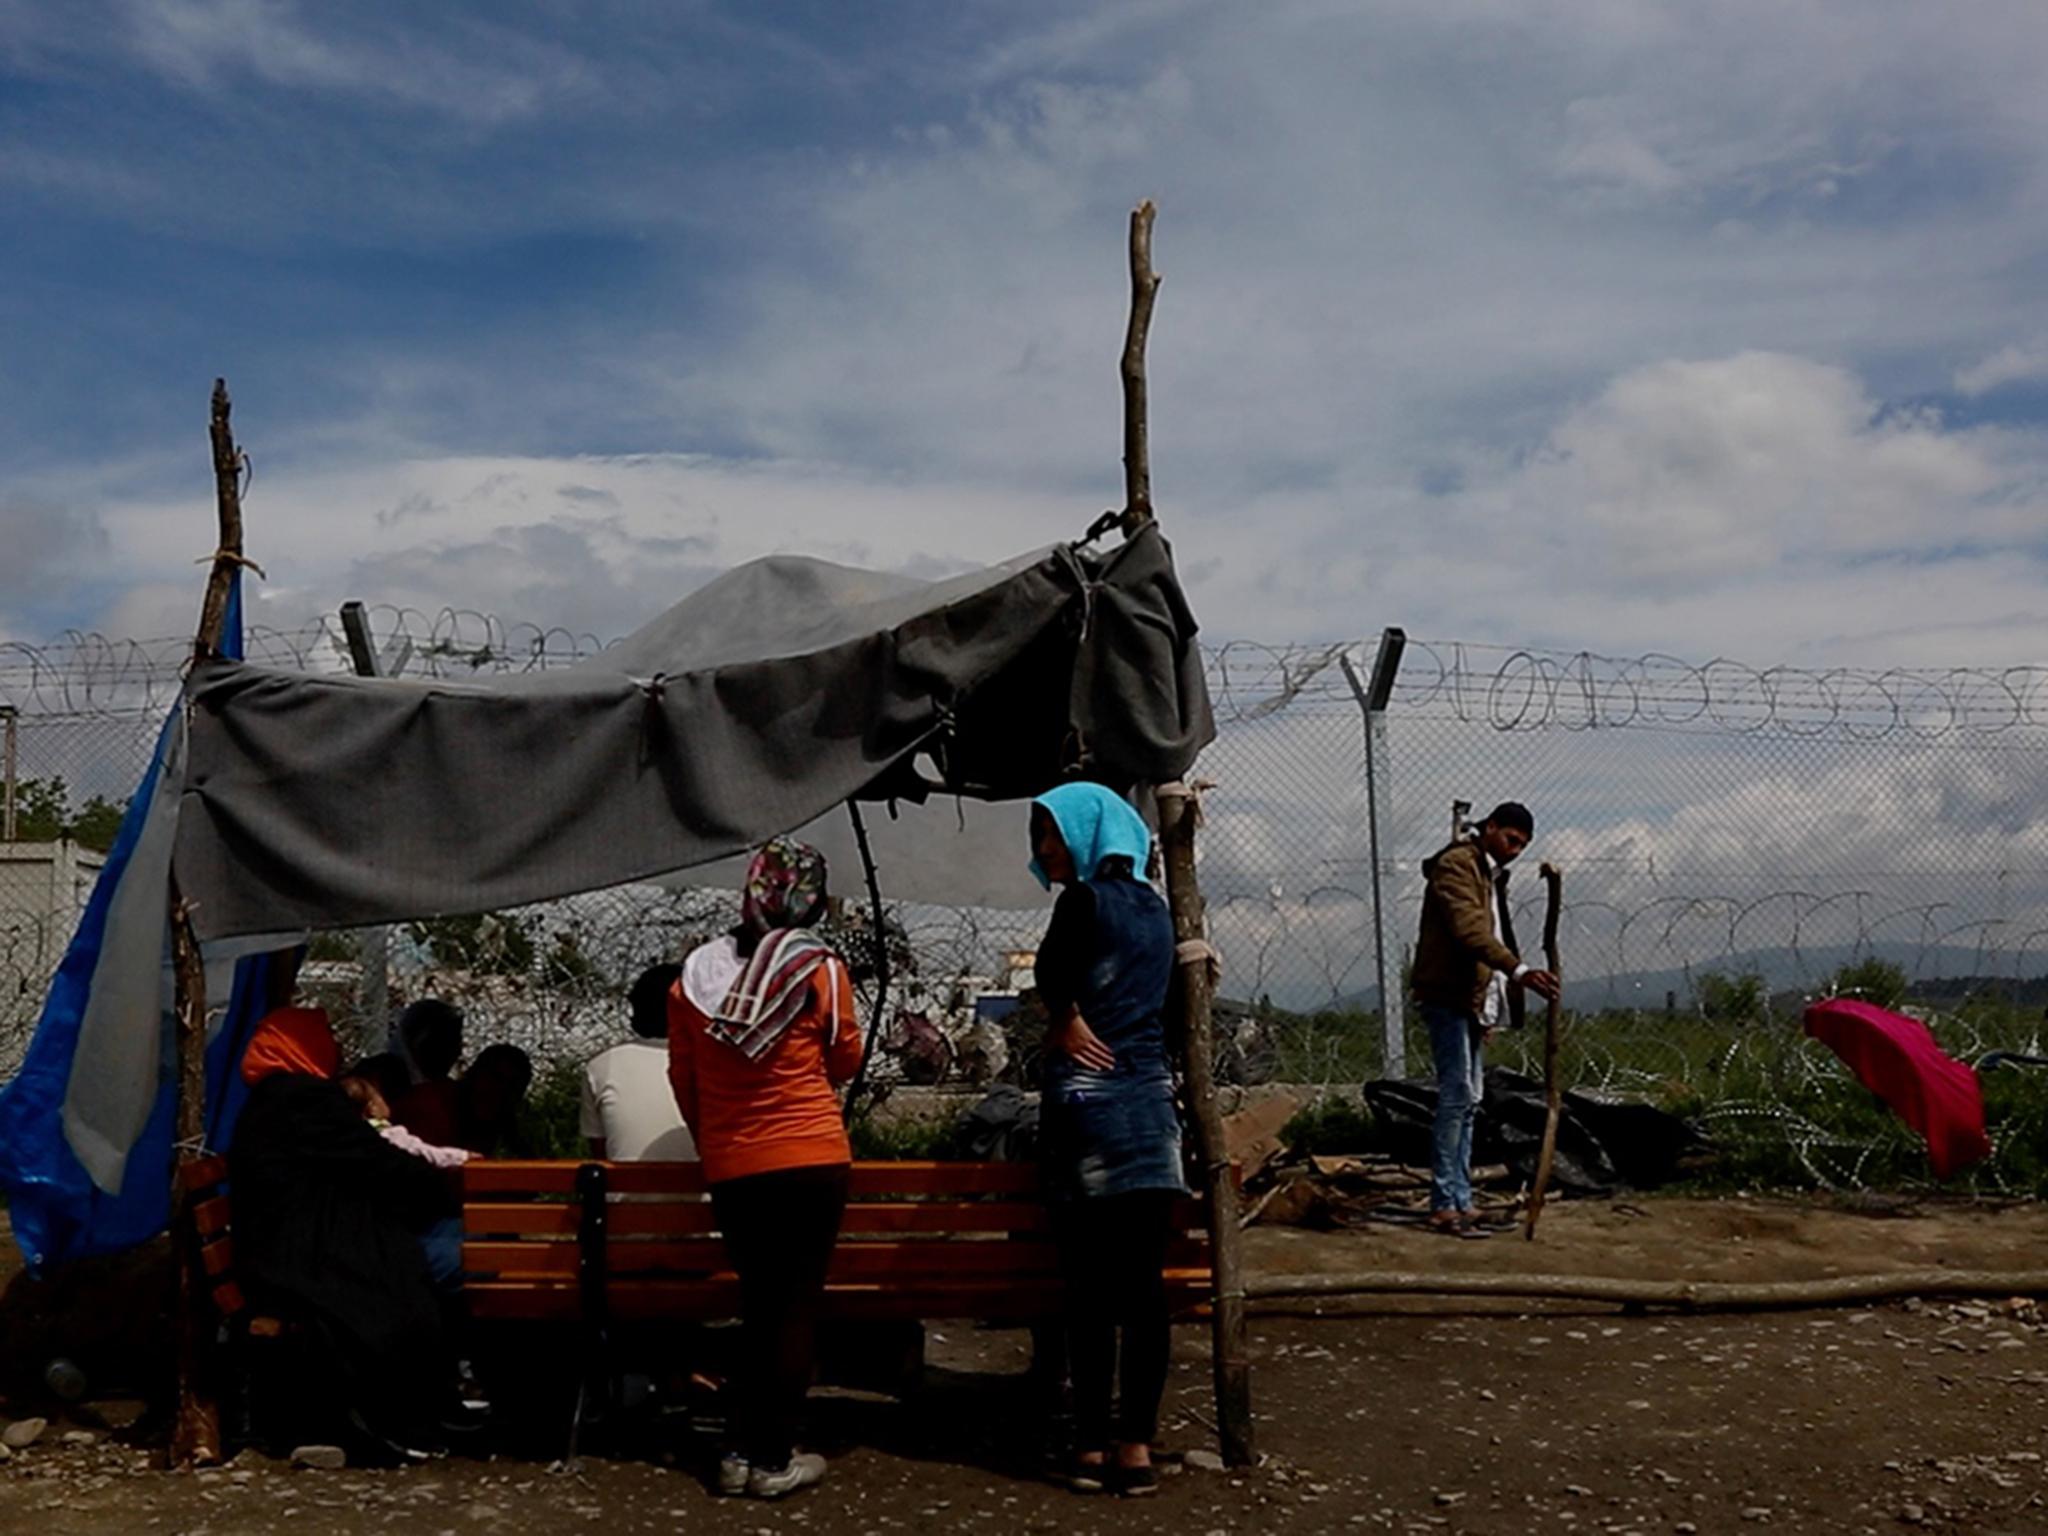 Nearly 60,000 migrants are trapped in Idomeni, a border town that formerly served as a waystation for those heading deeper into Europe. (The Washington Post)